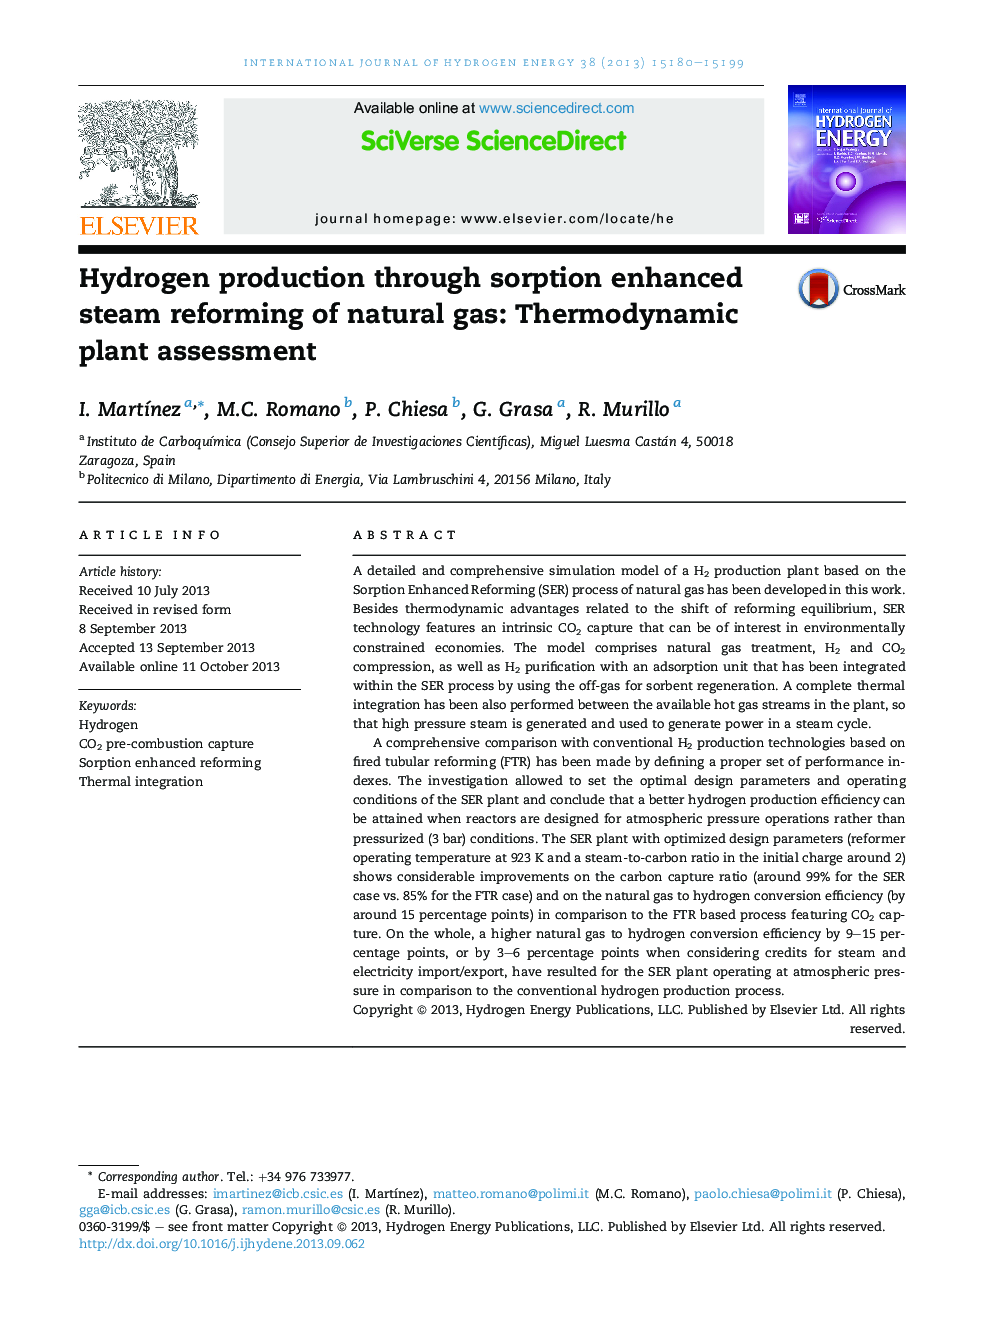 Hydrogen production through sorption enhanced steam reforming of natural gas: Thermodynamic plant assessment